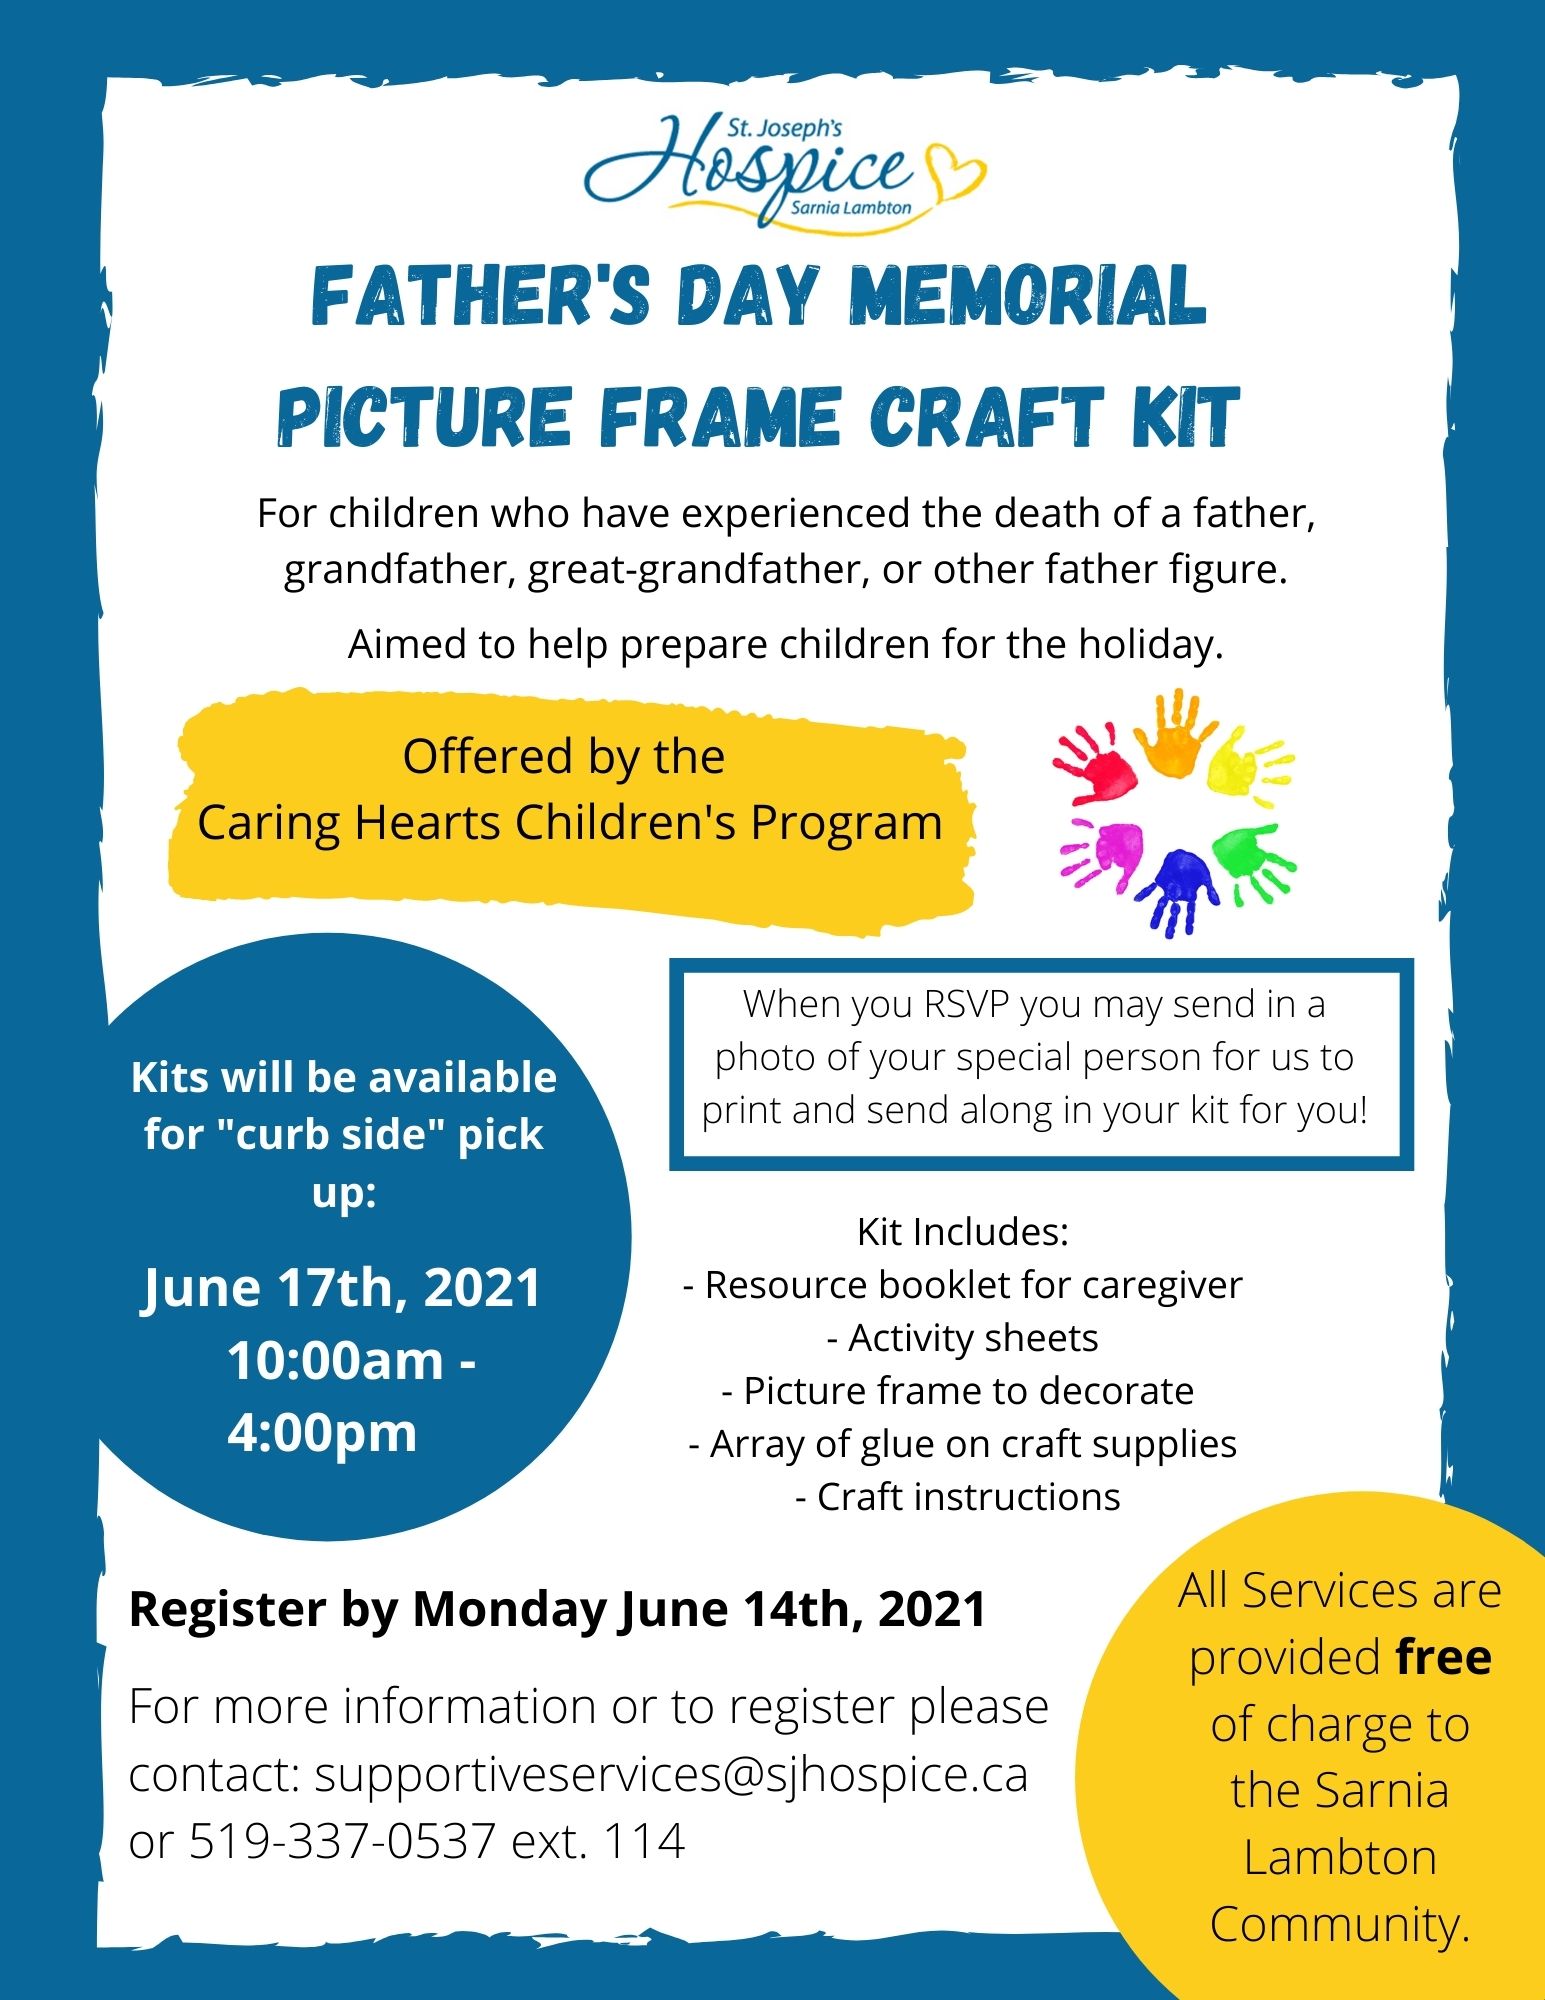 Father's Day Memorial Kit Event